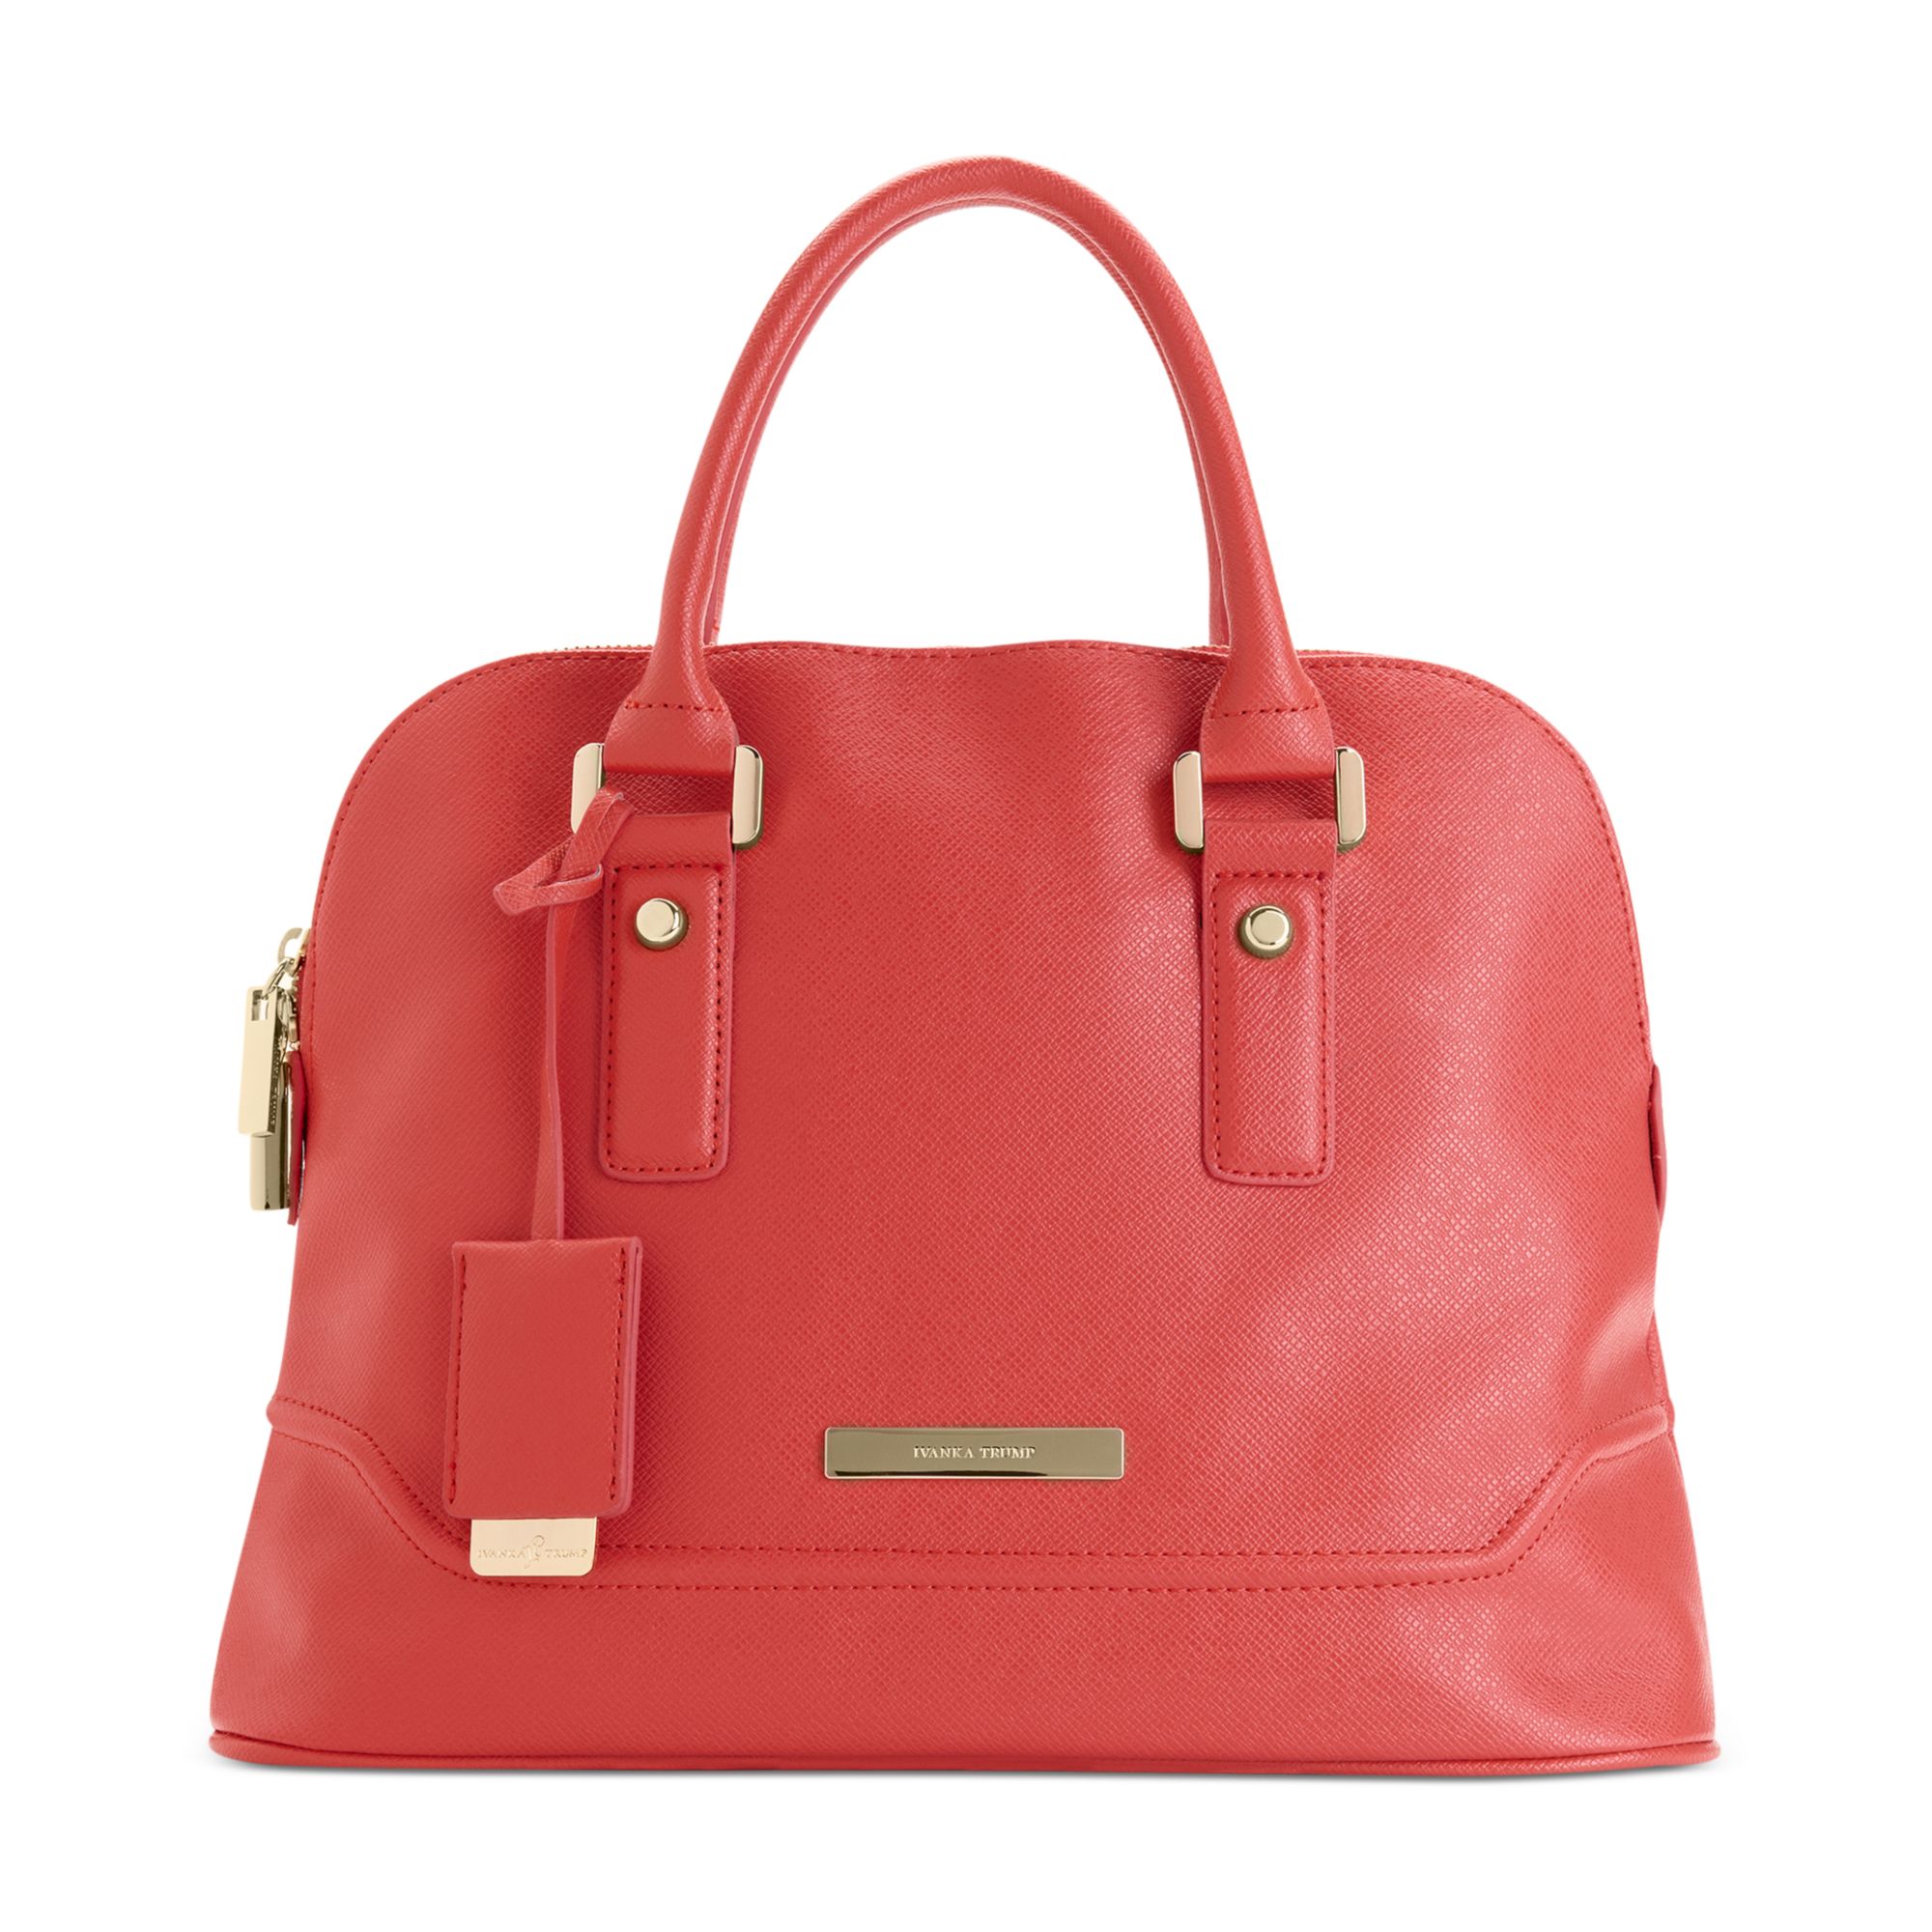 Ivanka Trump Ava Satchel in Red (Coral) | Lyst